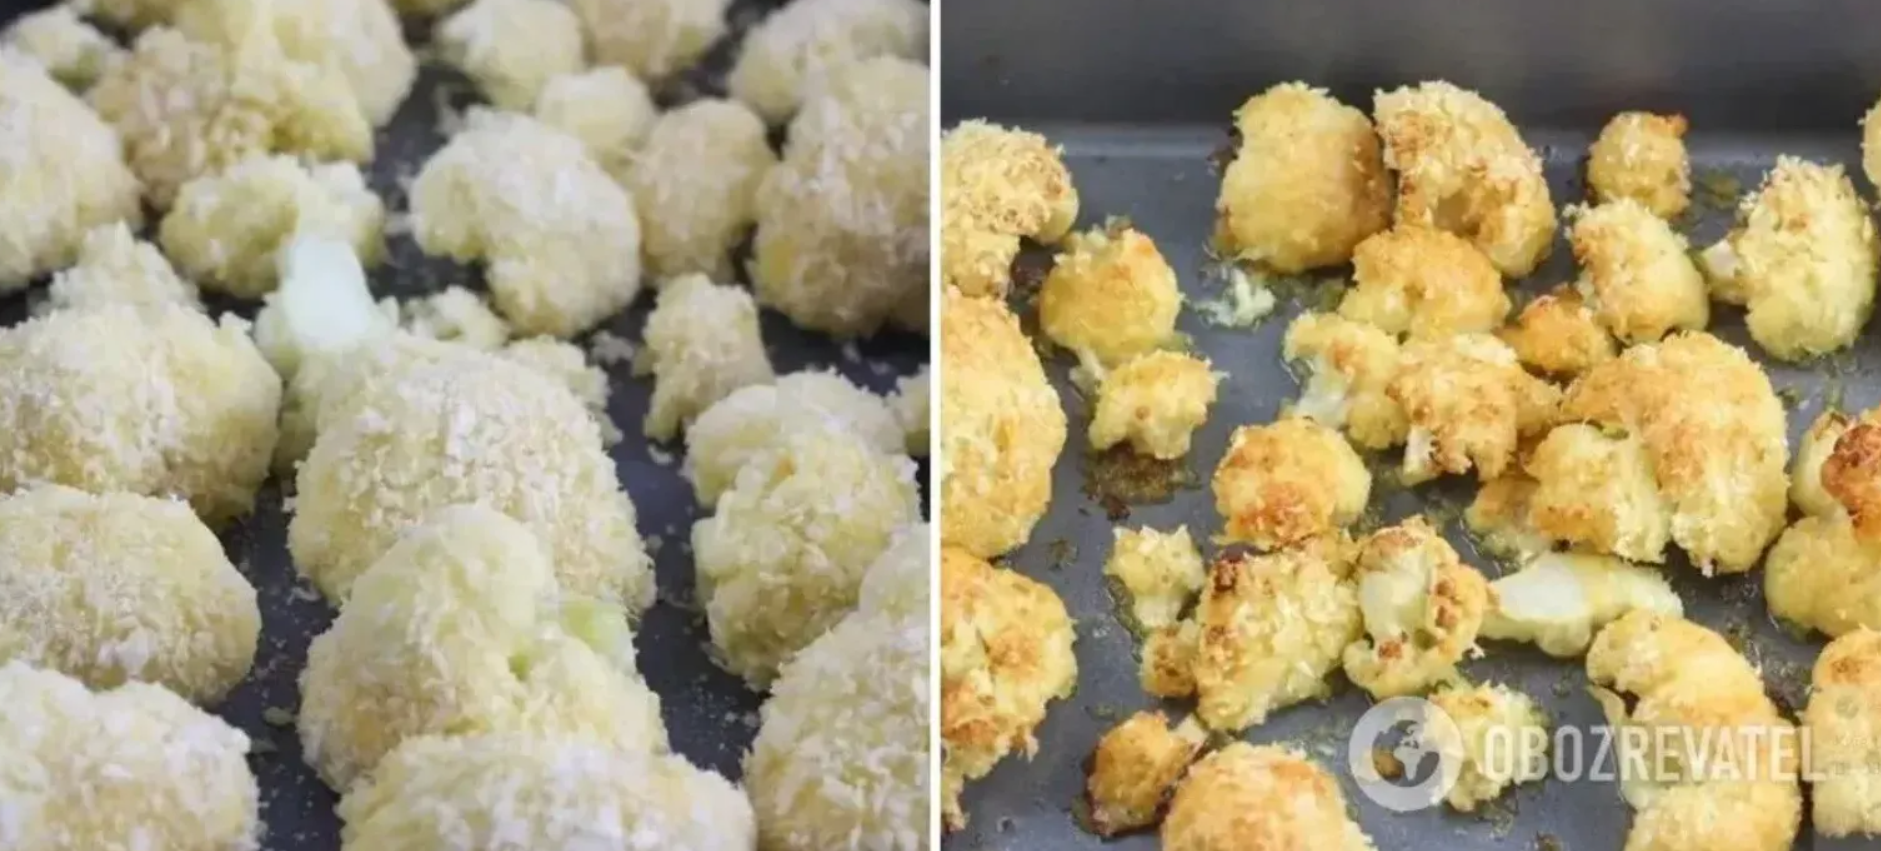 How to bake cauliflower deliciously